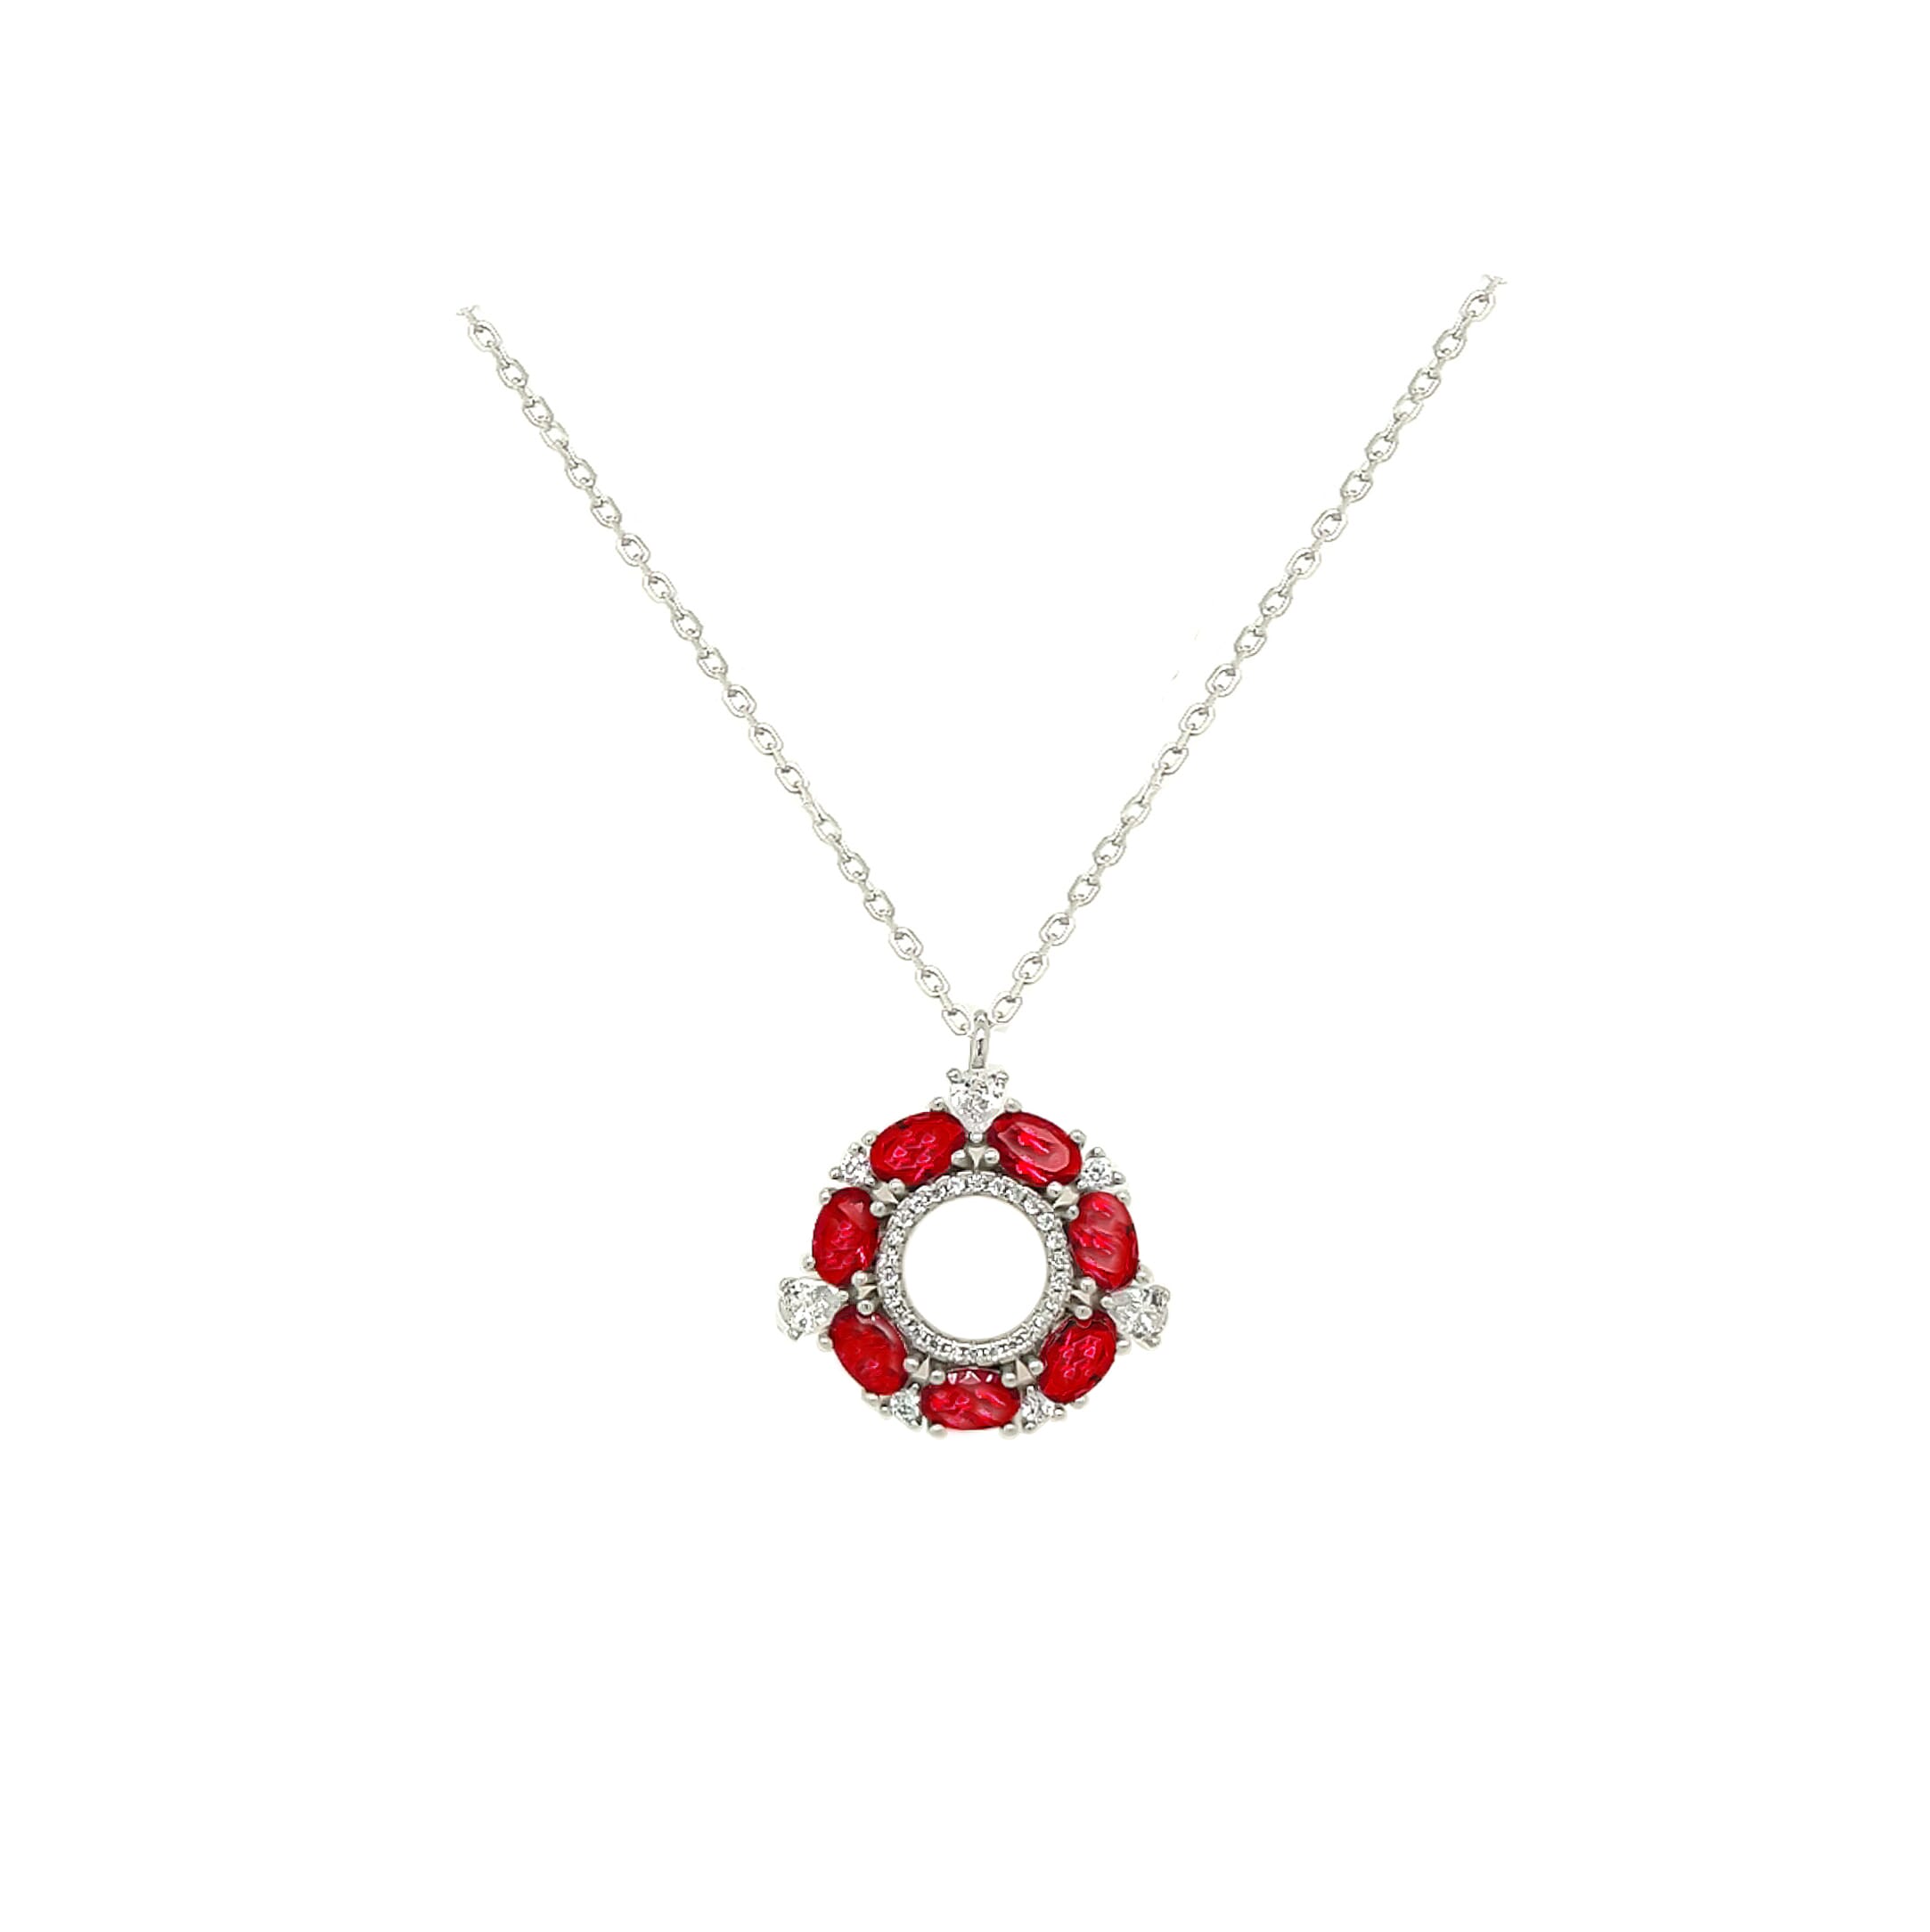 Asfour Crystal 925 Sterling Silver  Chain Necklace With Red Stones